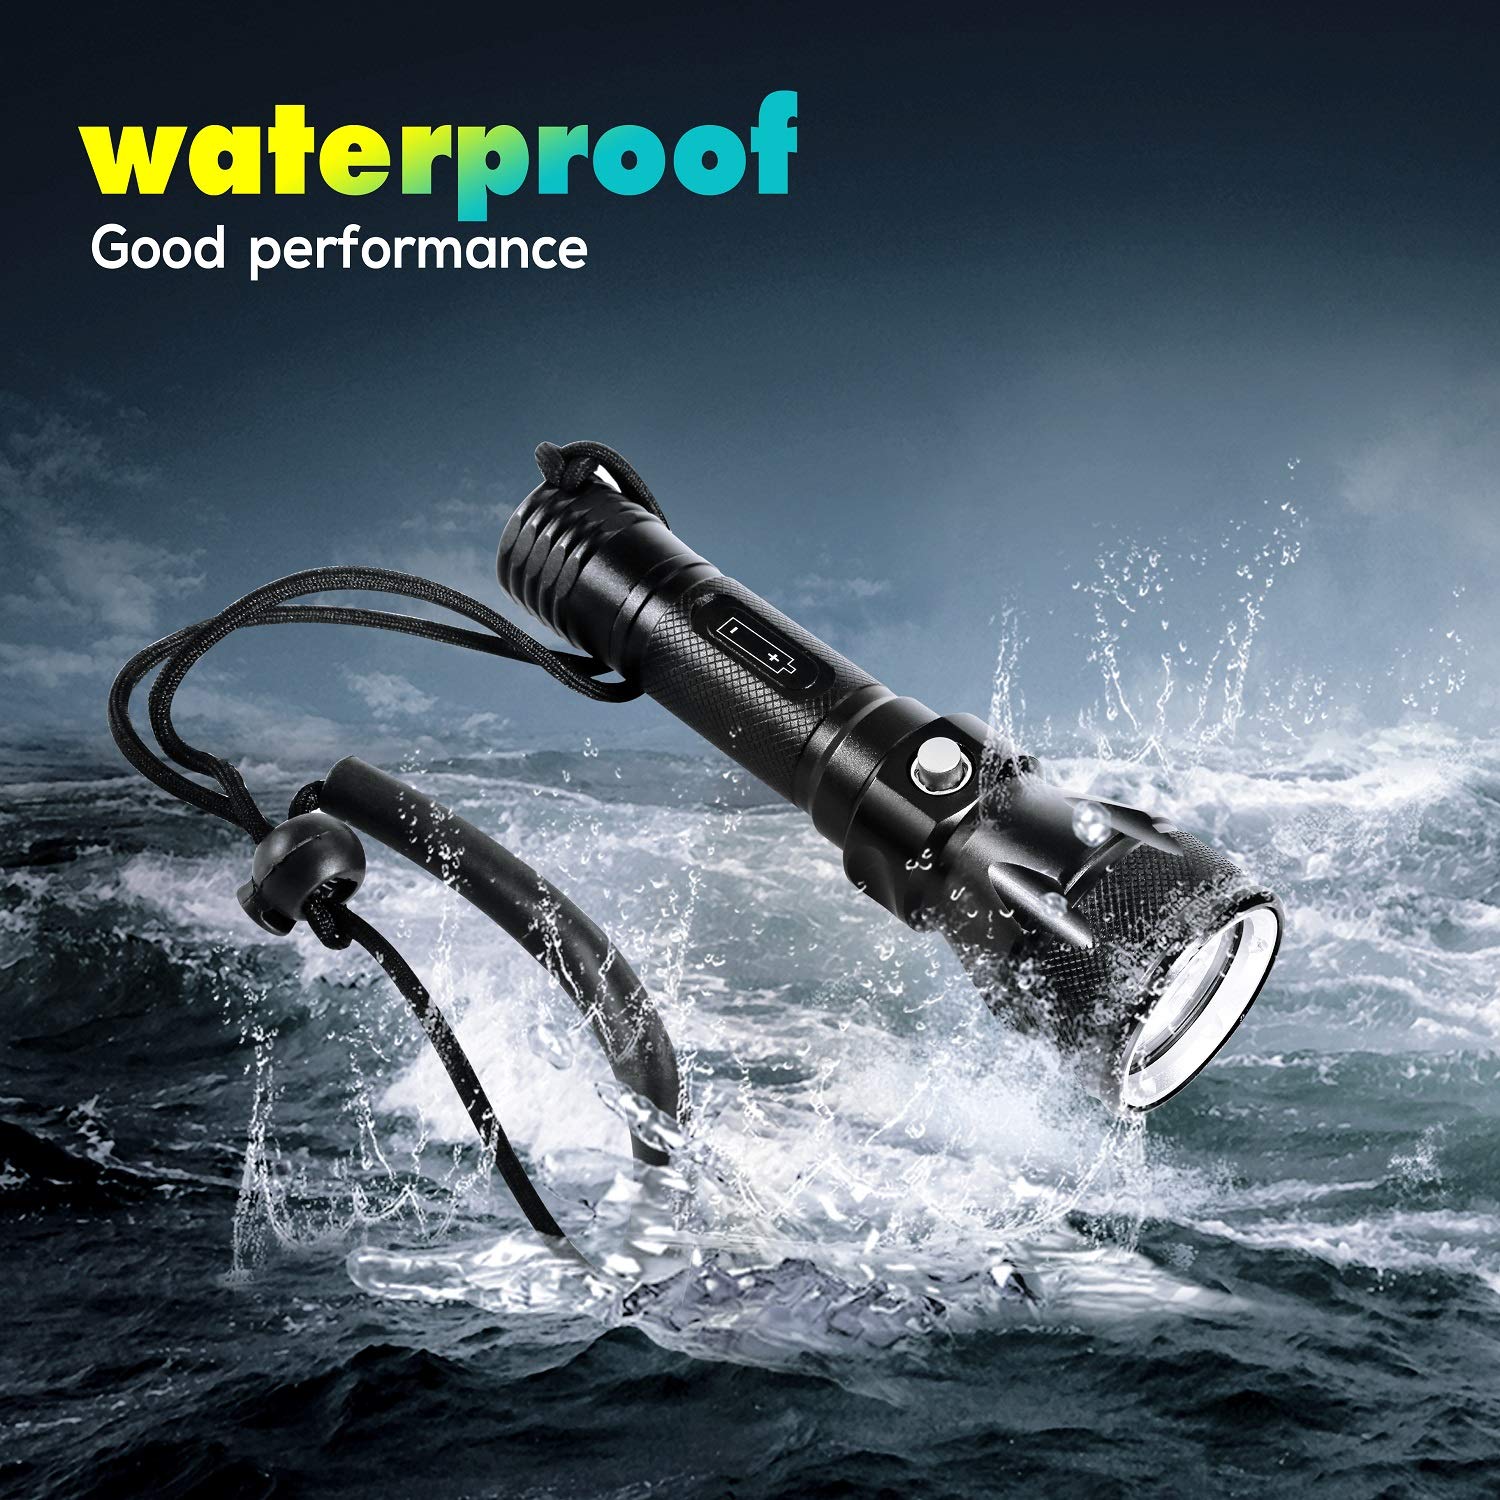 Black BlueFire Diving Torch 1200 Lumen XM-L2 LED Bright Professional Scuba Flashlight Safety Lights with Hand Strap /& Lanyard